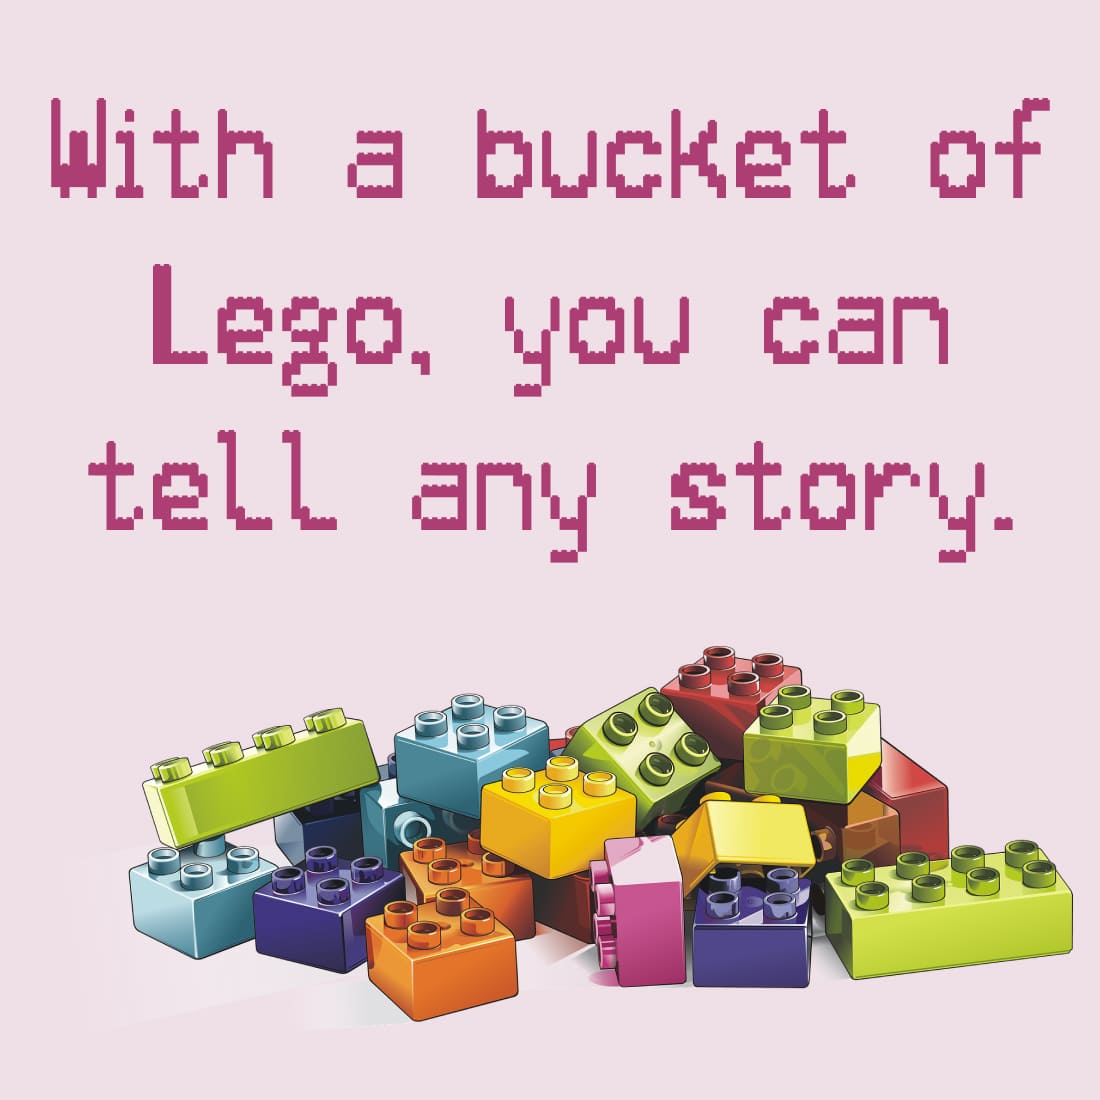 Lego bricks are depicted and a phrase relevant to the font of this style is written.